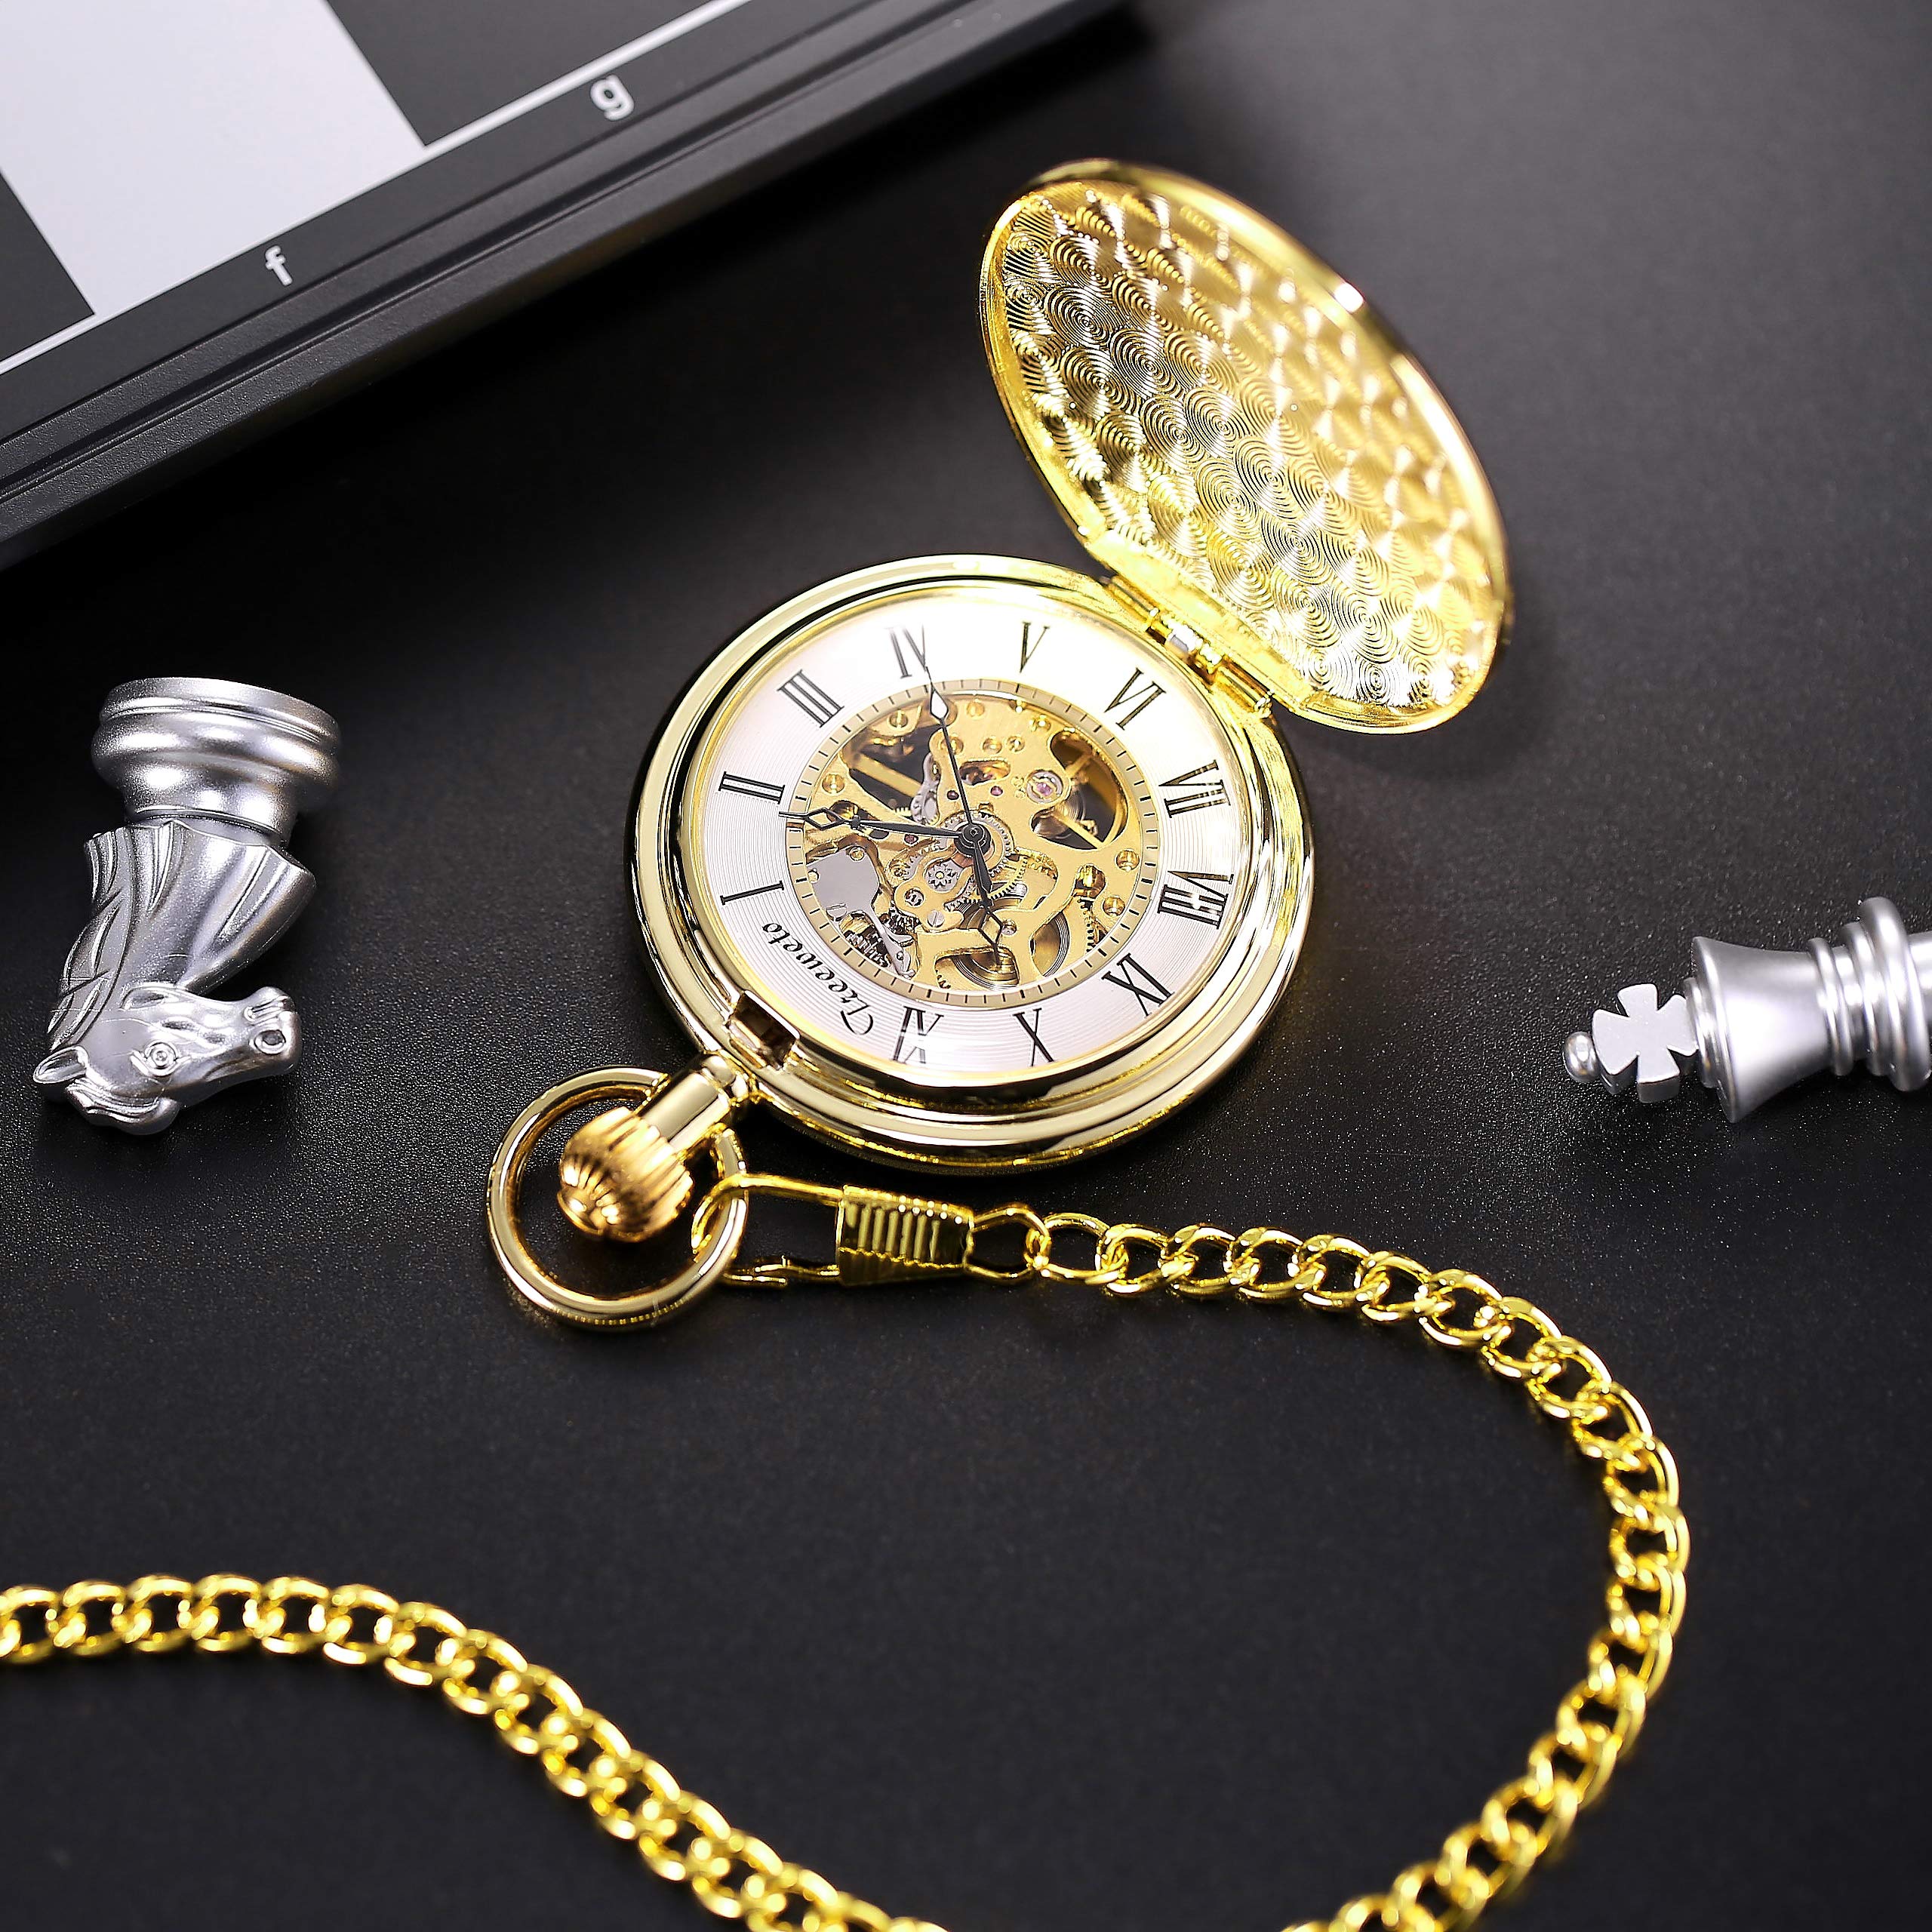 TREEWETO Pocket Watch Gold Smooth Case Skeleton Dial Mechanical Movement with Chain + Box